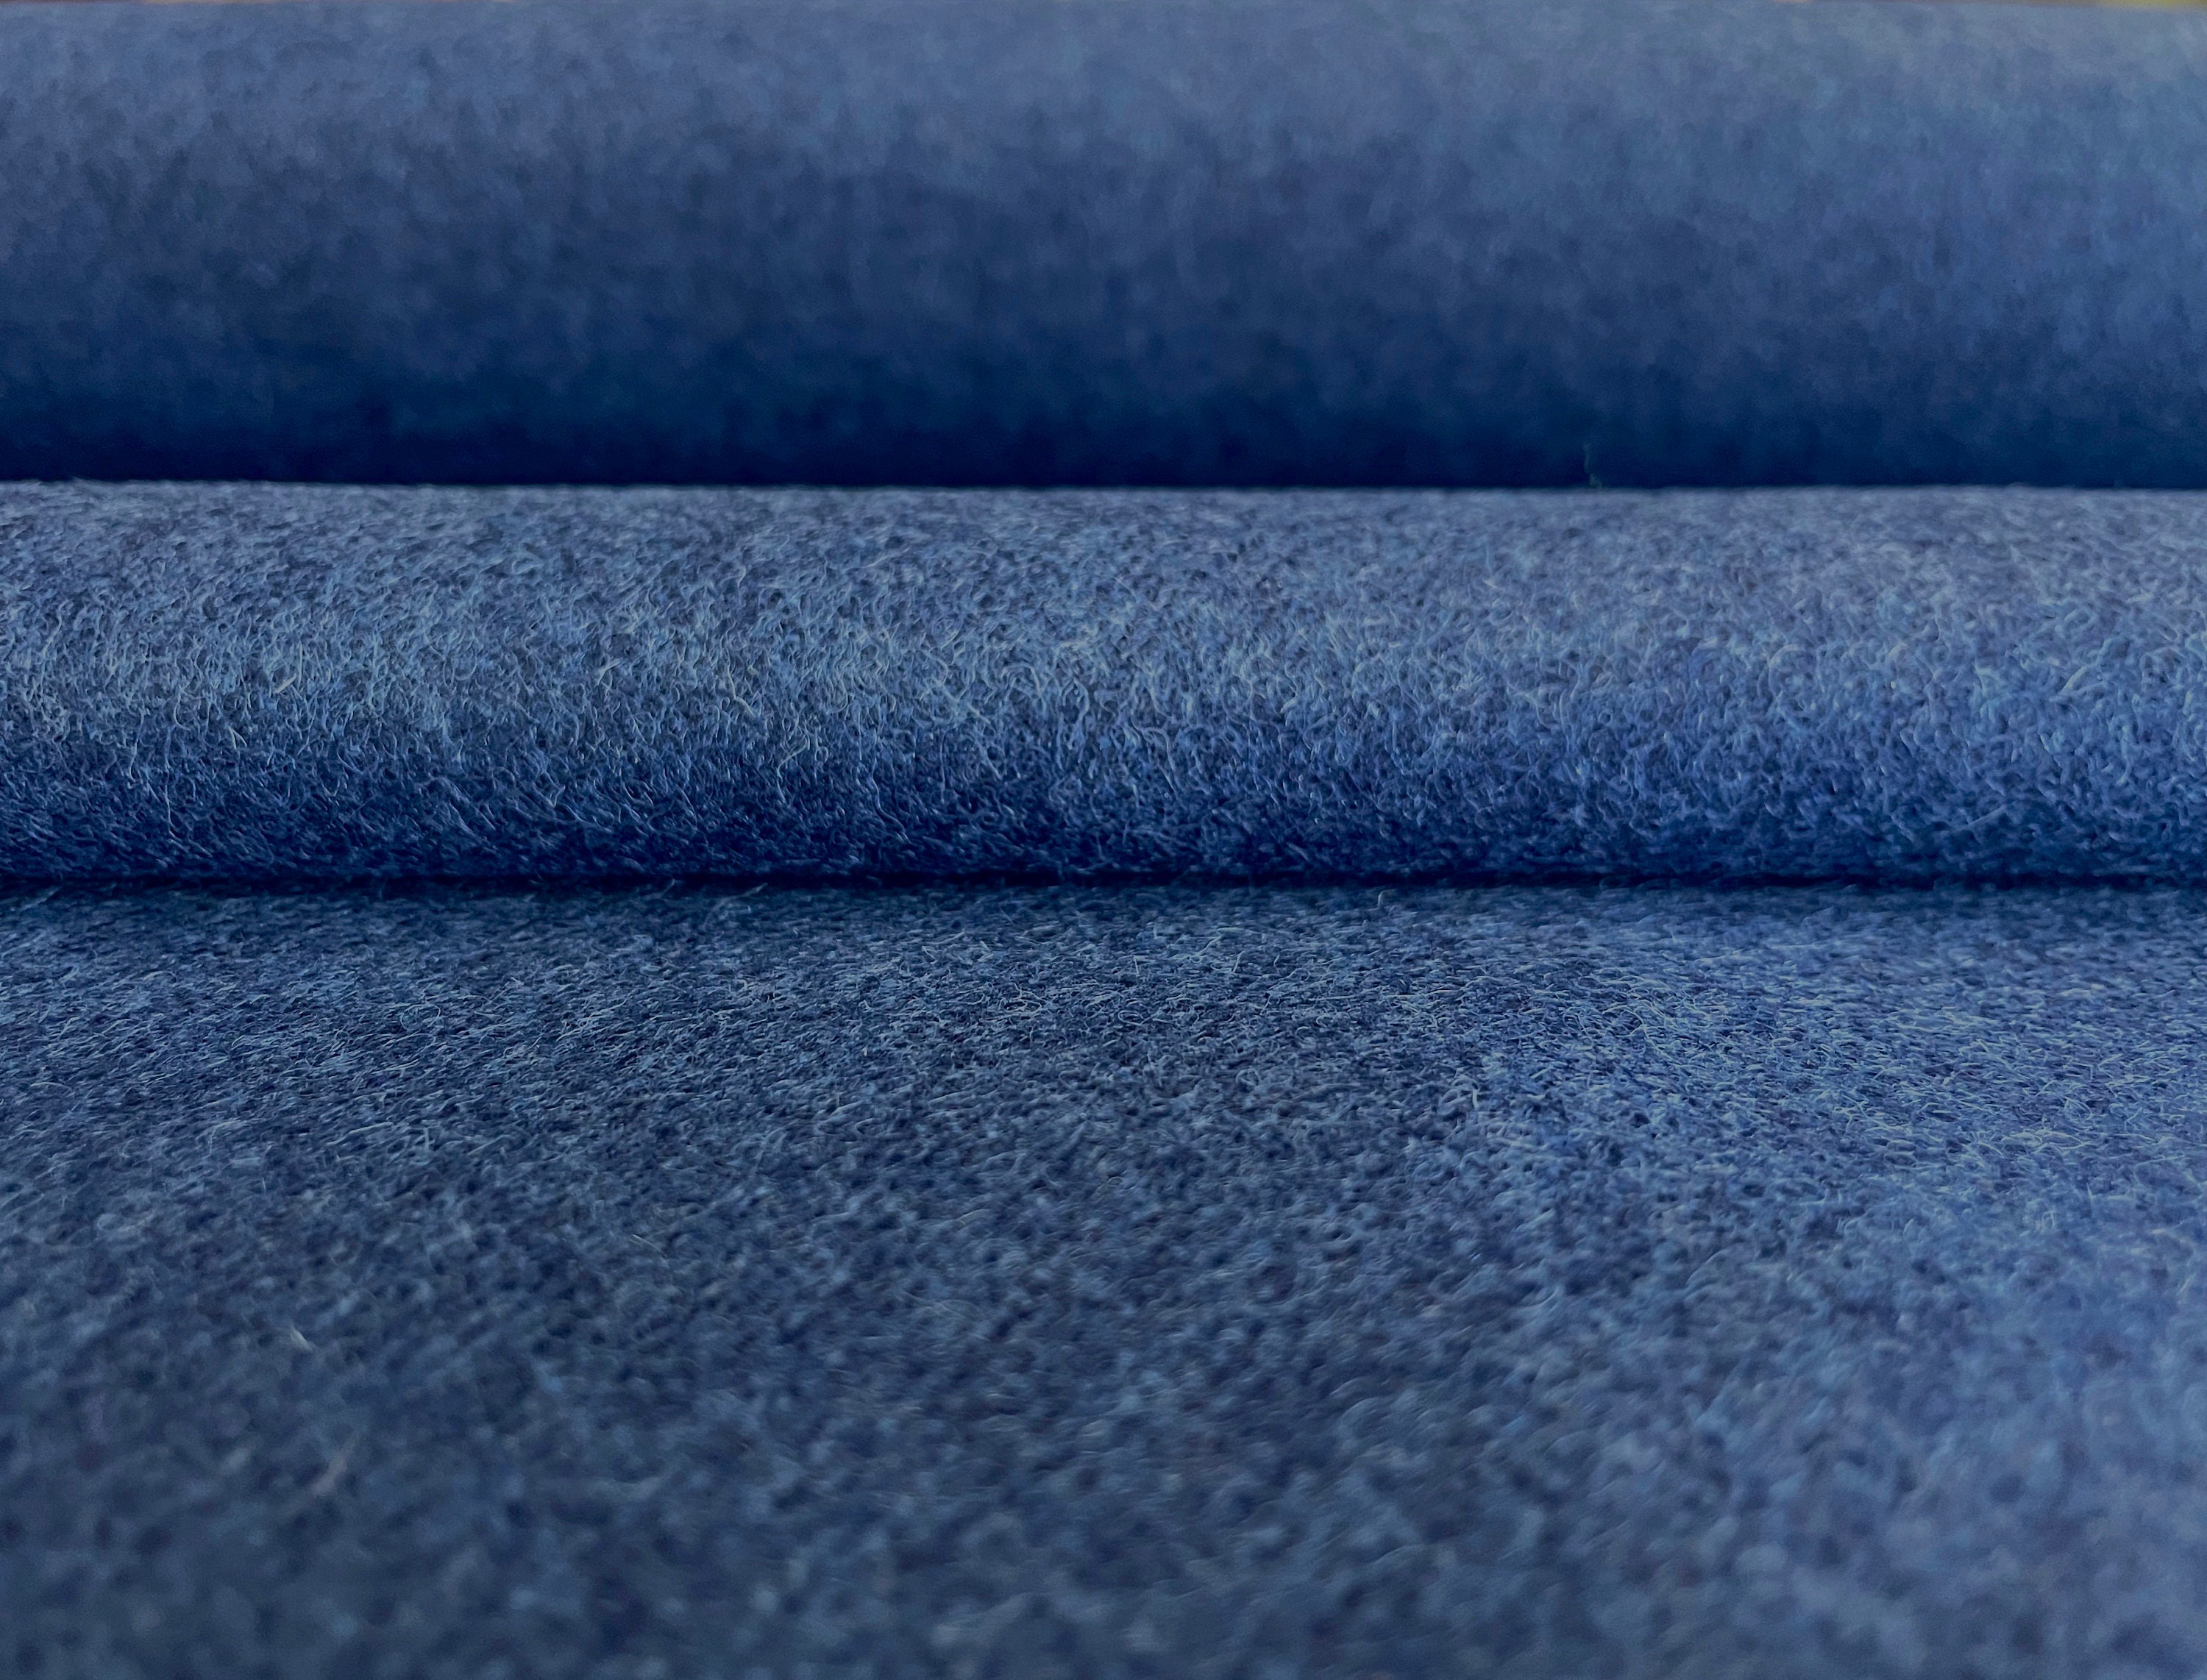 Polyester Wool Fabric Brushed Coating 59 inches Wide Soft By The